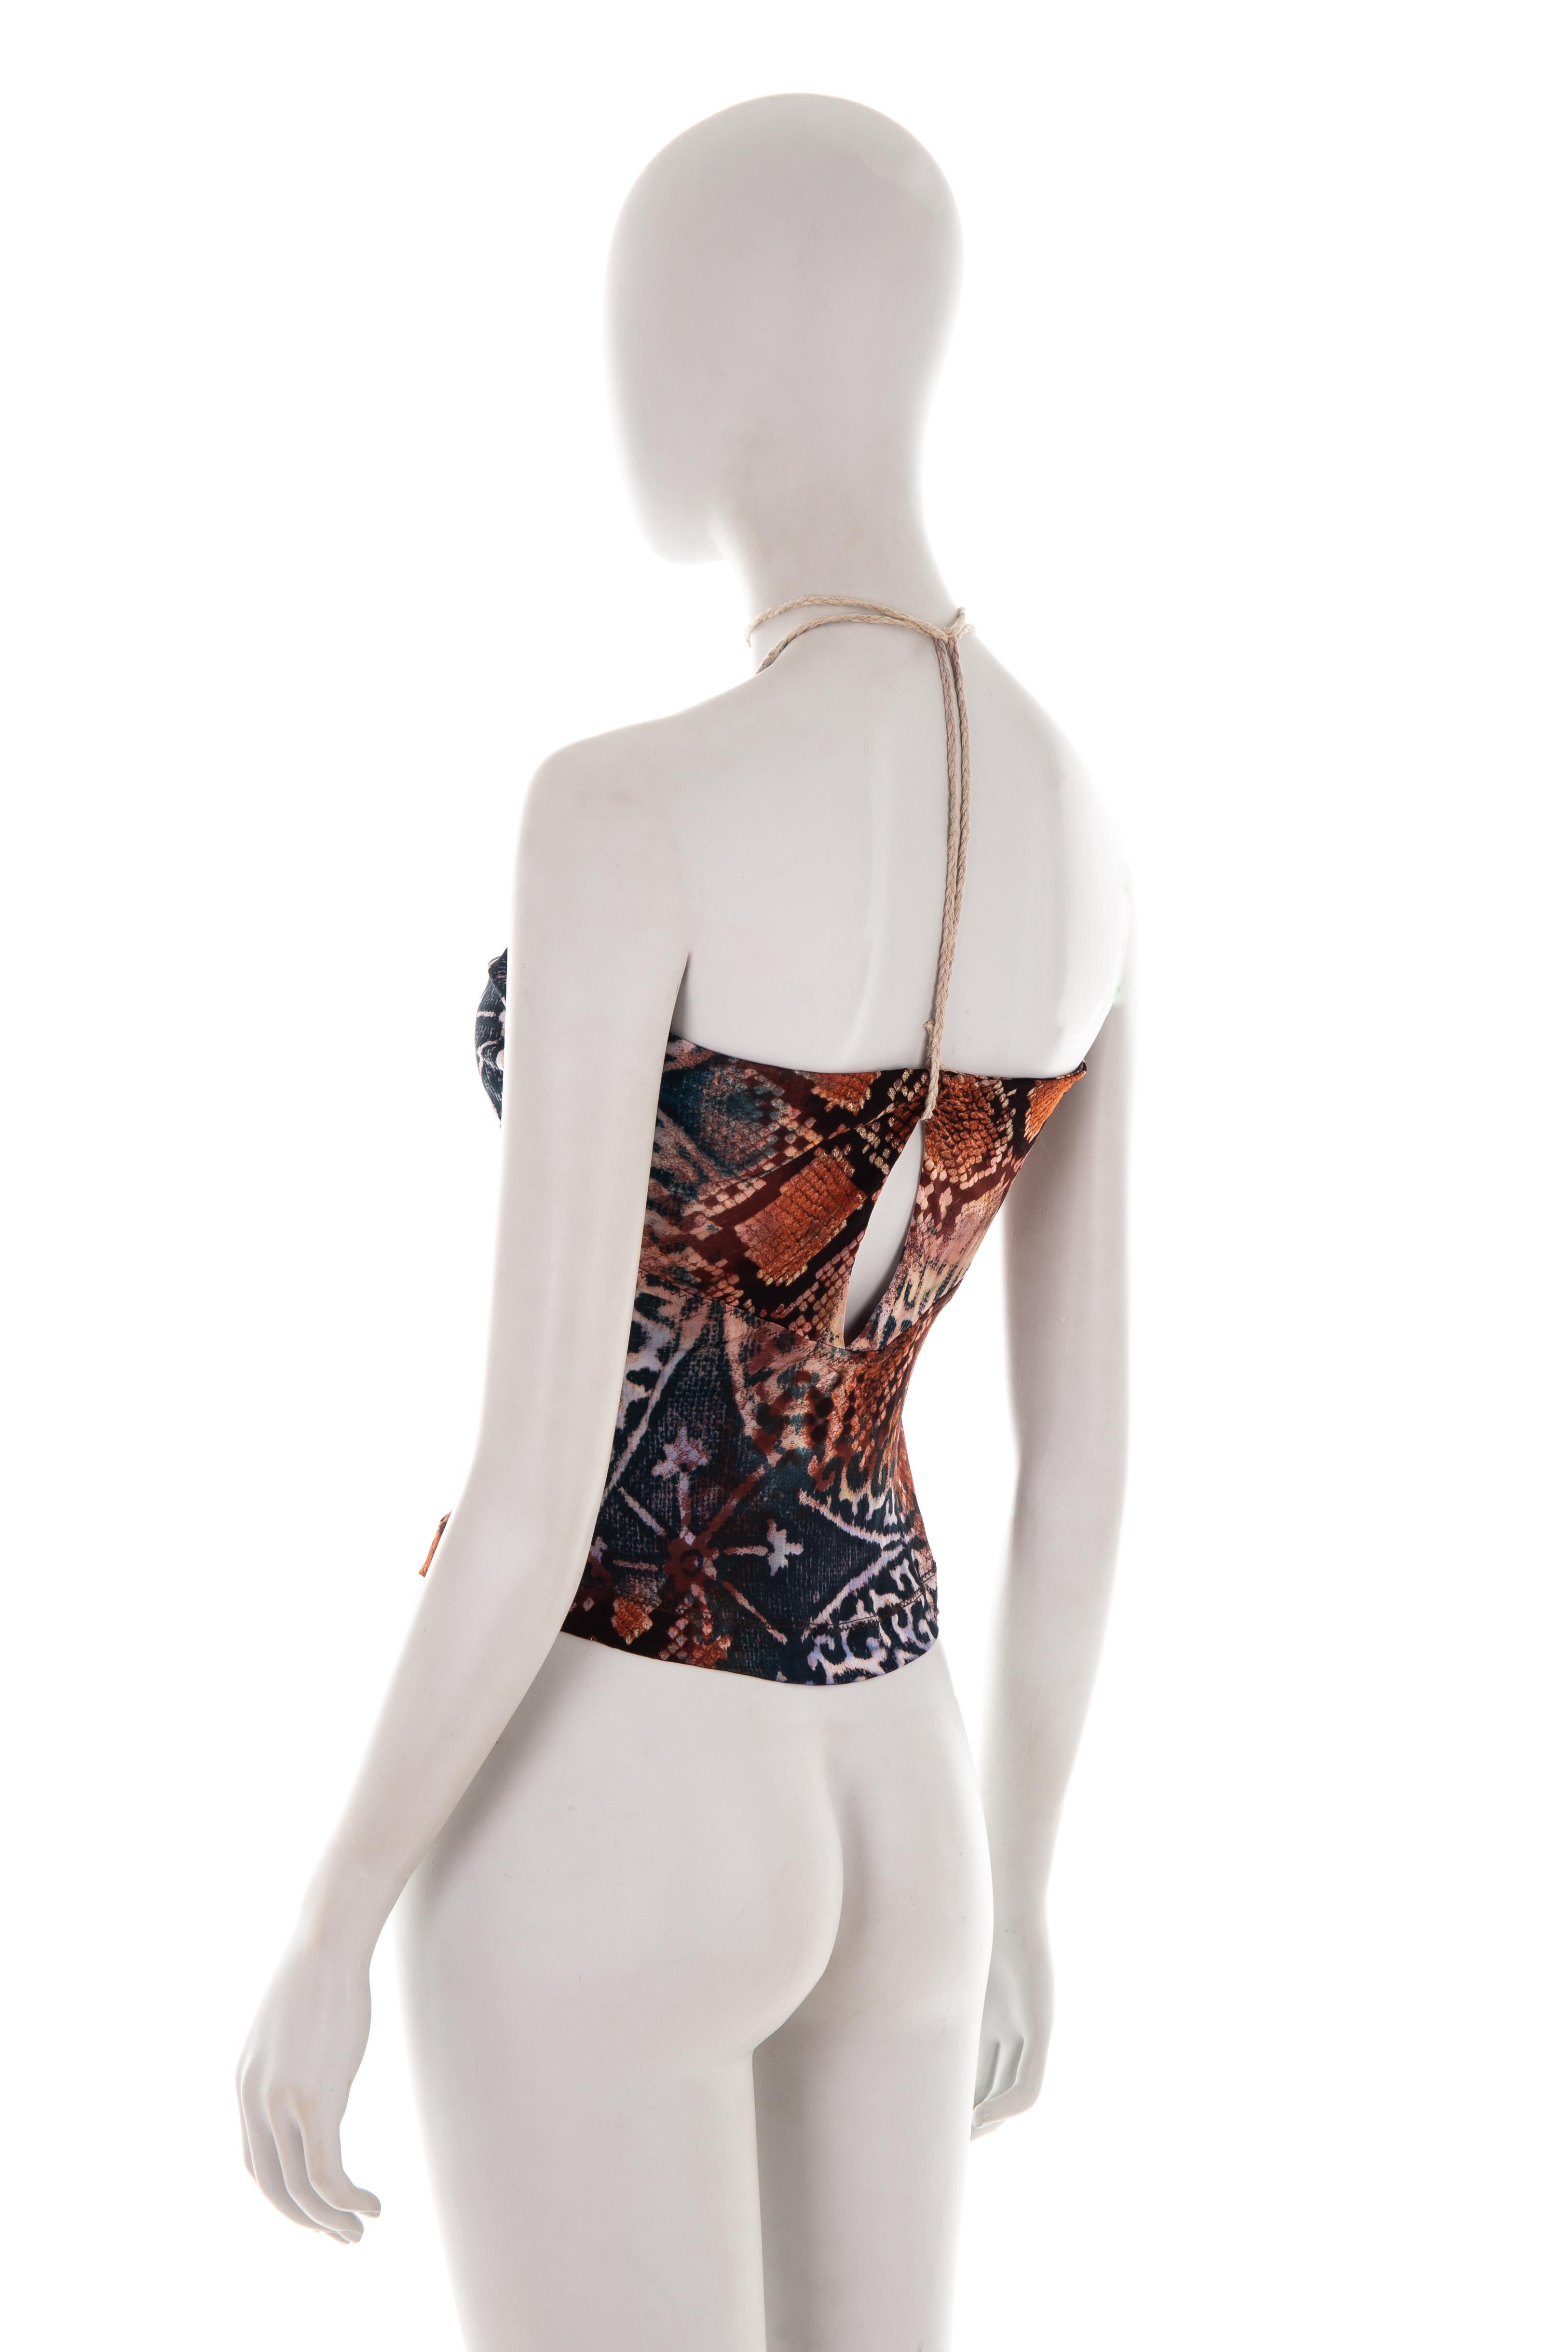 Just Cavalli S/S 2006 python print halter top In Excellent Condition For Sale In Rome, IT